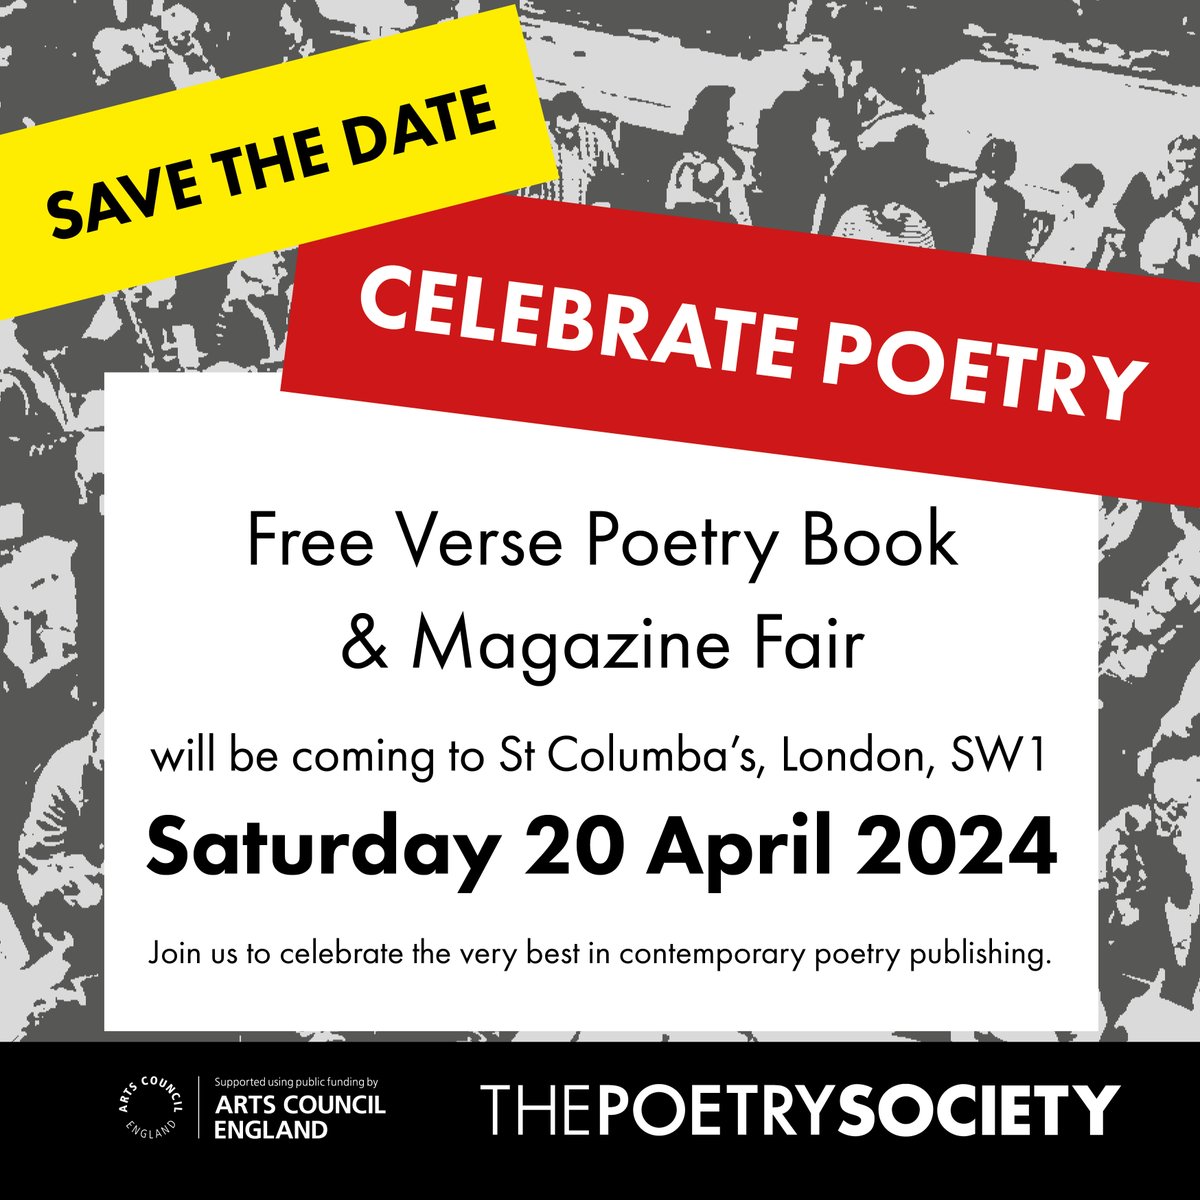 Fifty (!) publishers have already signed up for the 2024 Free Verse Poetry Book & Magazine Fair. We're keeping tables at the early bird price of £50 for one more day. Don't miss out! poetrysociety.org.uk/product/poetry…